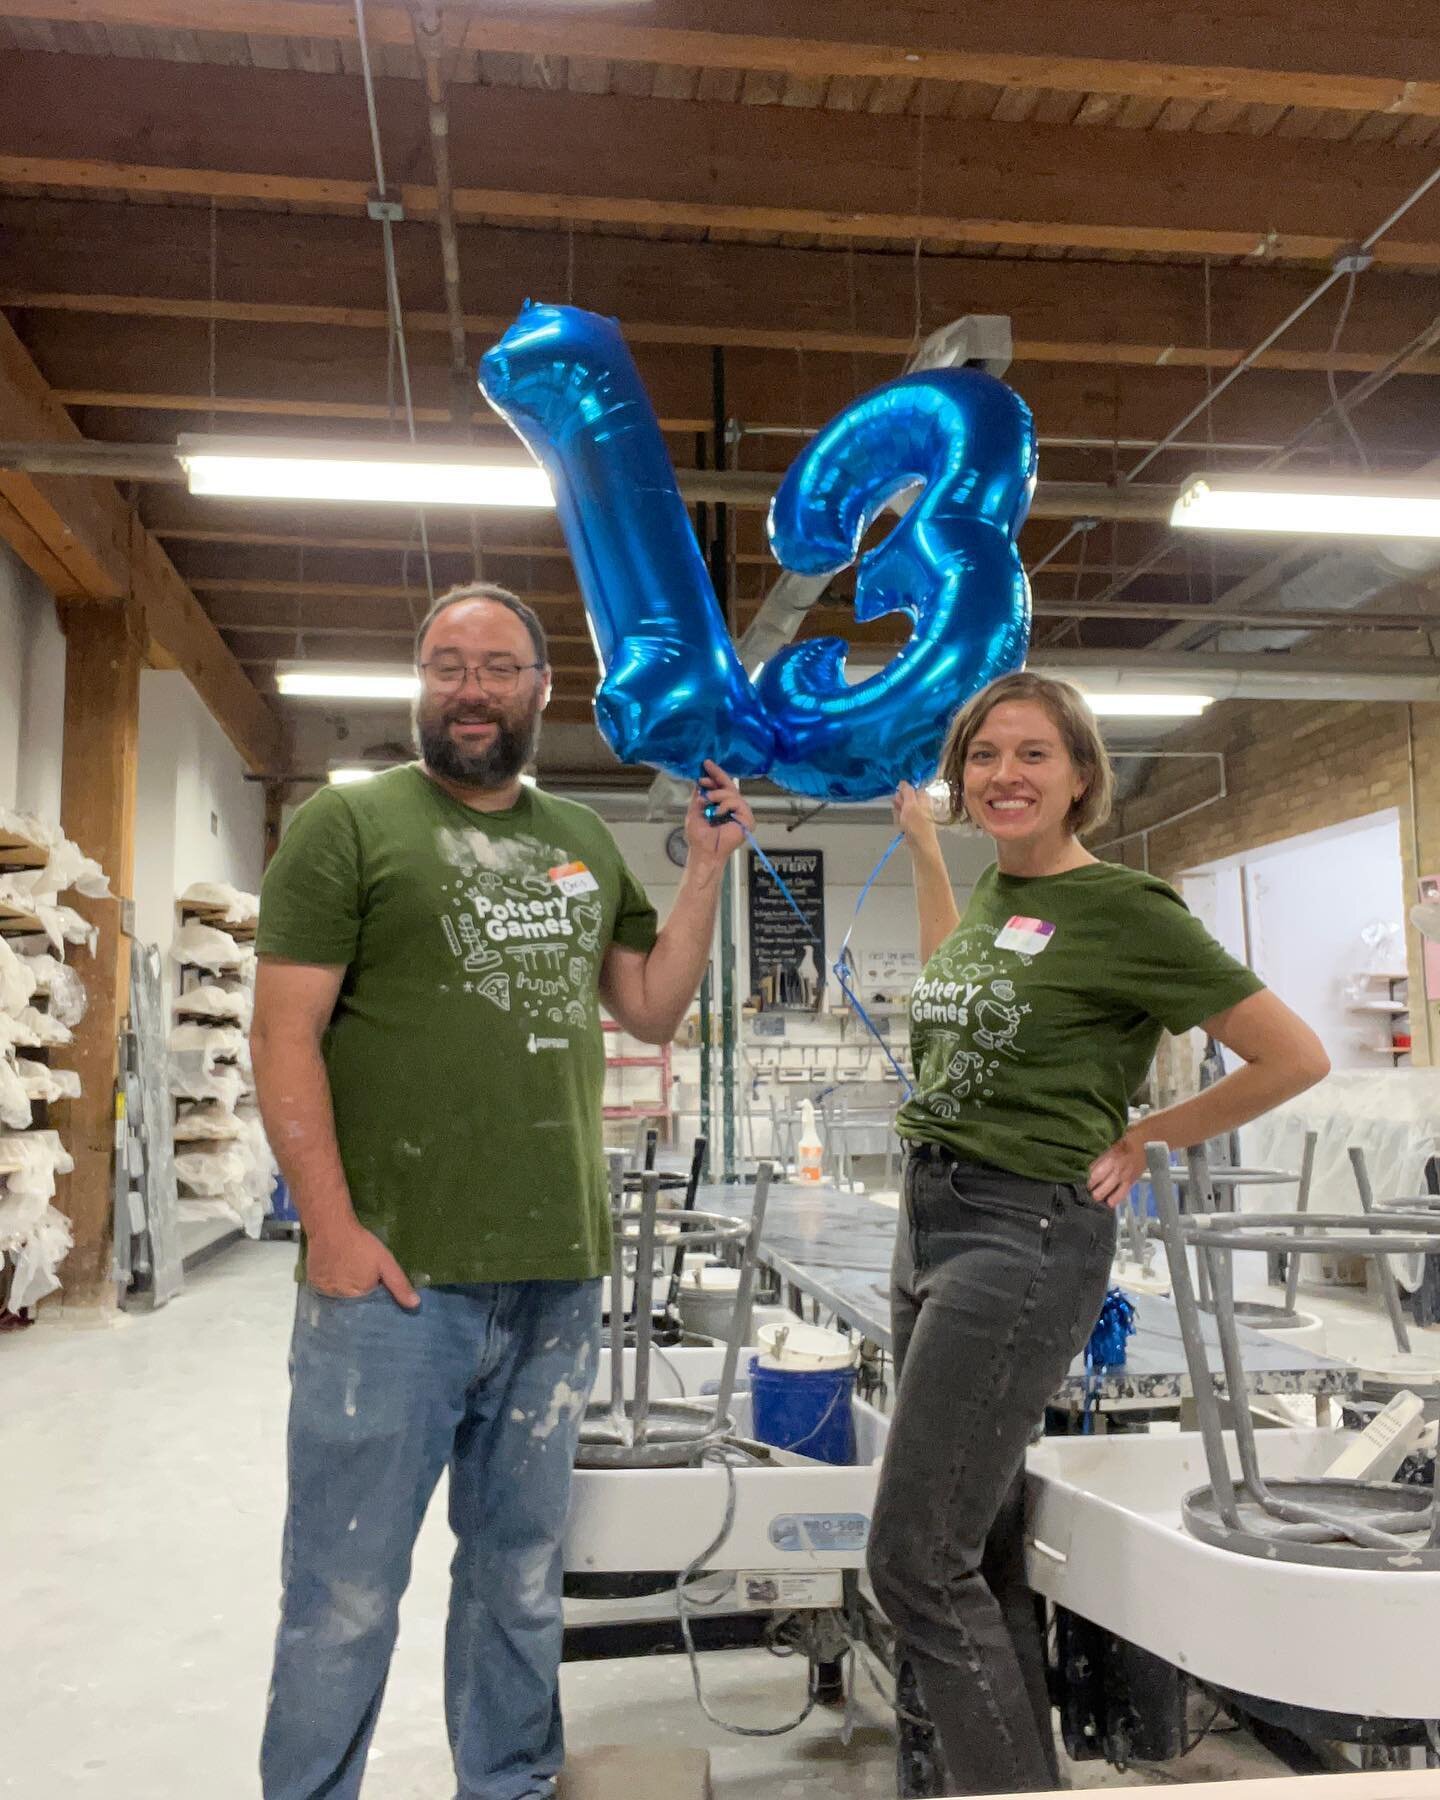 Hey y&rsquo;all, Chris and Paige here. We&rsquo;re co-owners of this studio, but you might know us better as that maintenance guy and maybe the IT girl? 😆

Each year we put out the call to come celebrate our business anniversary with a bunch of sill